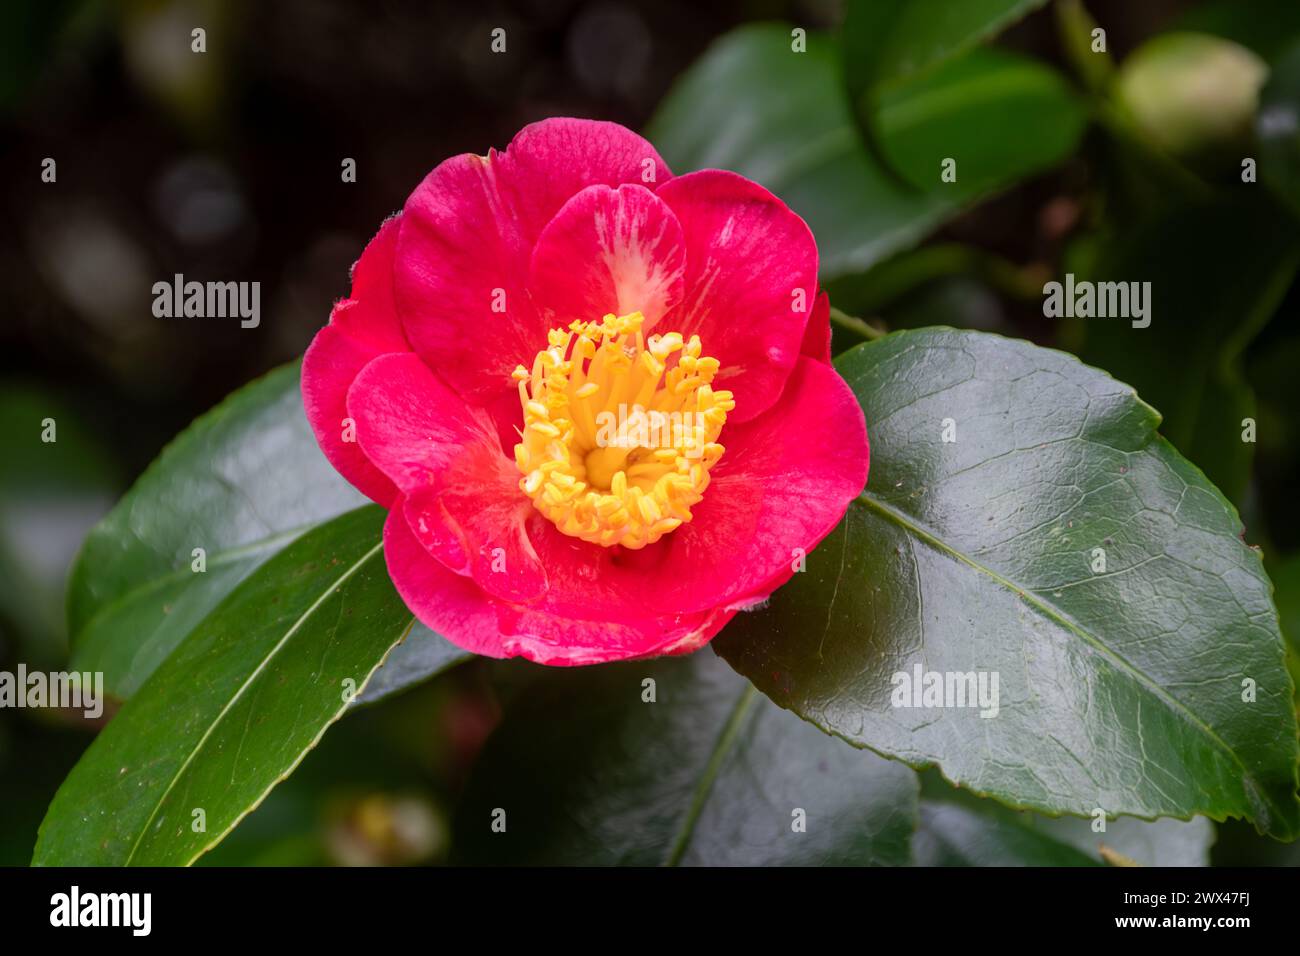 Camellia japonica 'De la Reine' with deep pink flowers during March or spring, England, UK Stock Photo